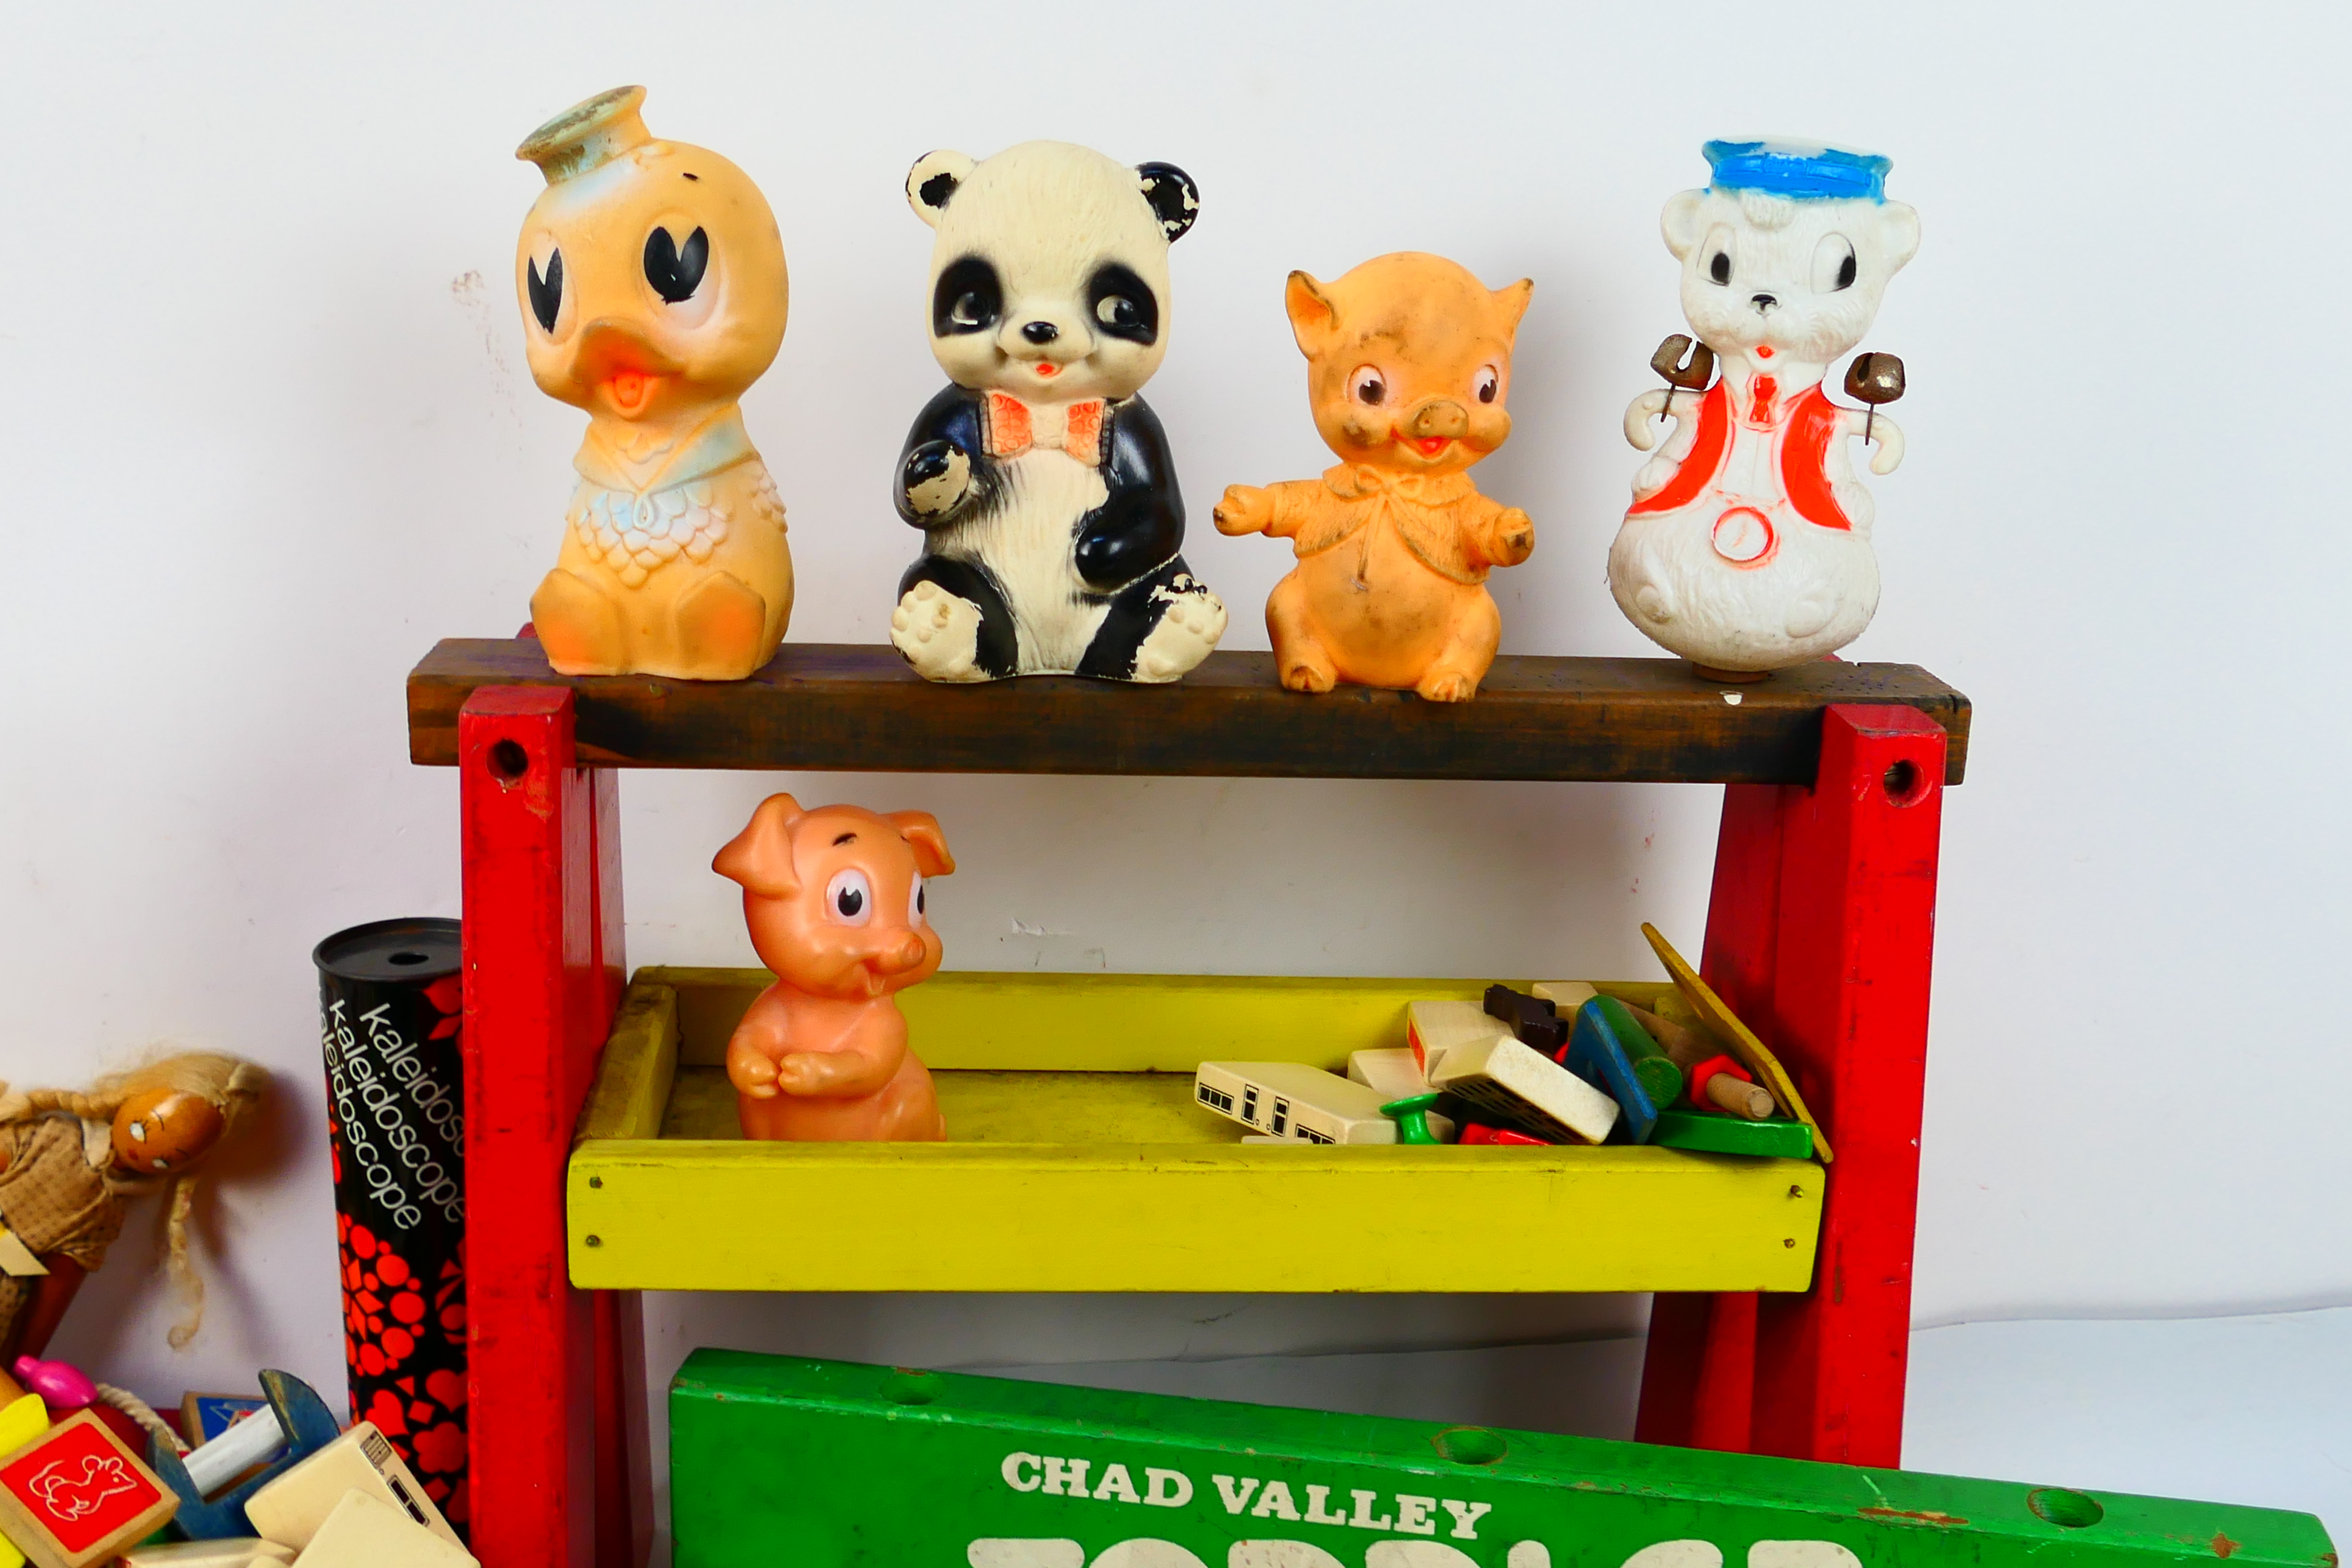 Chad Valley - Galt Toys - Wooden Toys. - Image 2 of 4